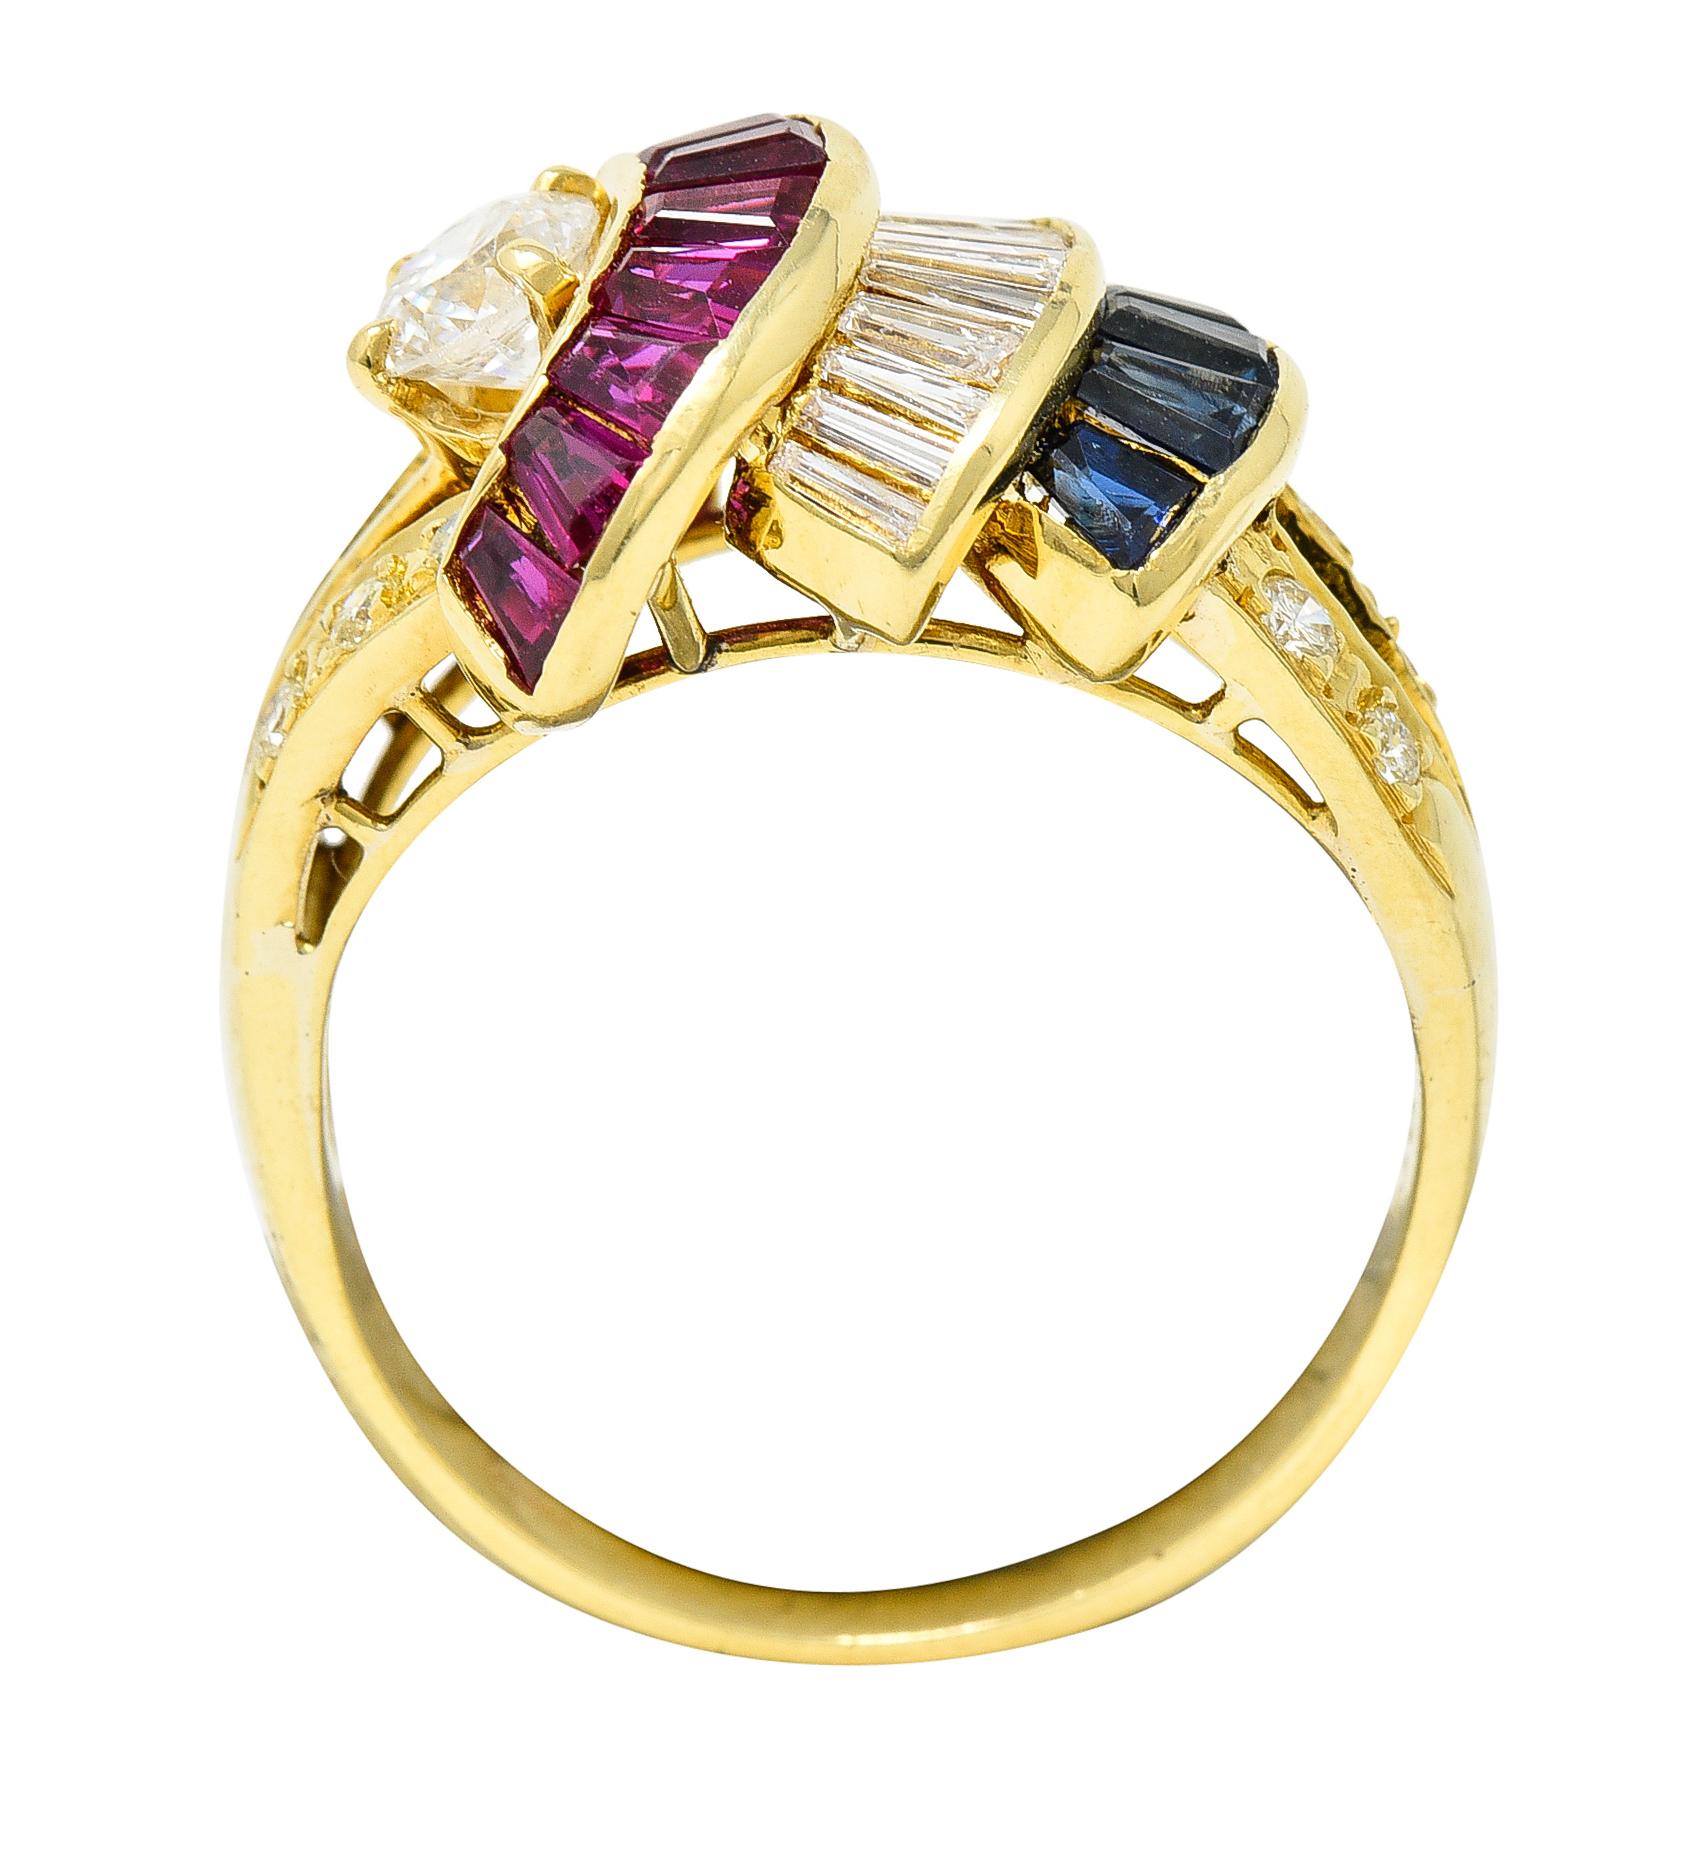 Band ring is designed with split shoulders and features tiered arch forms. With a prong set round brilliant cut diamond weighing approximately 0.25 carat - F color and SI2 clarity. Accompanied by channel set rubies and sapphires - medium dark blue